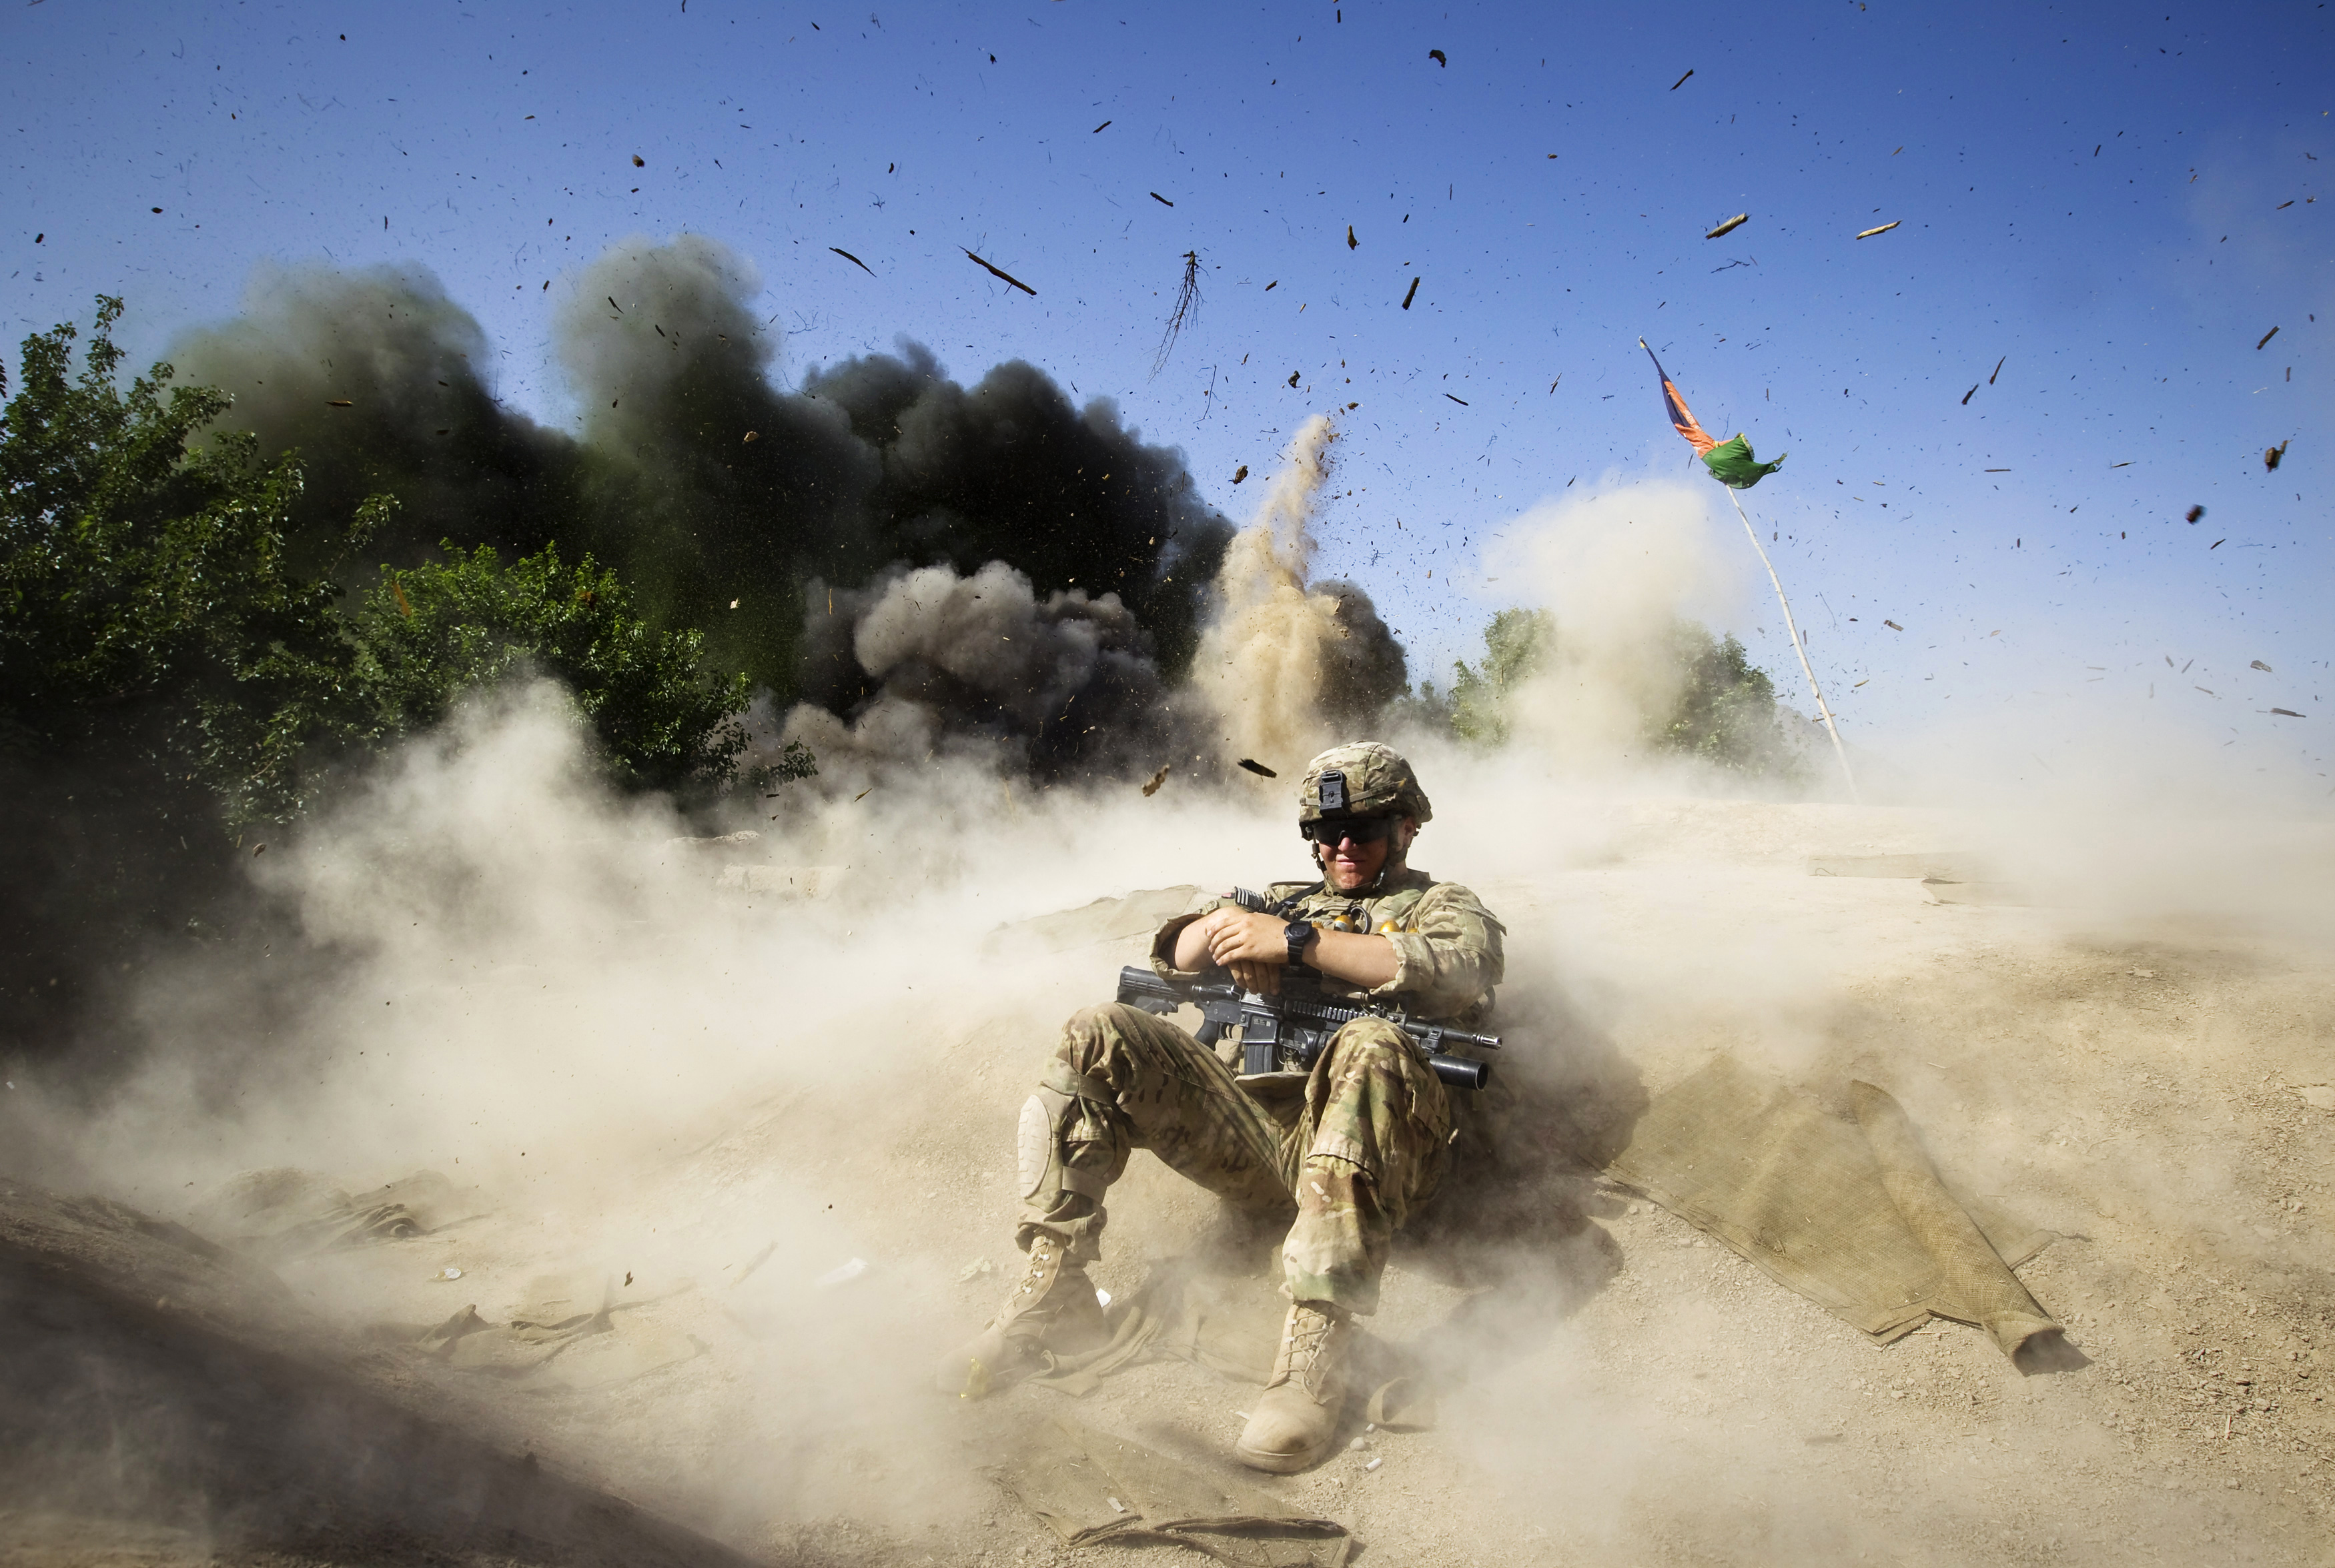 Jake Beaudoin, a U.S. Army Private of 82nd Airborne Division, takes cover during a controlled detonation to clear an area for setting up a check point in Zahri district of Kandahar province